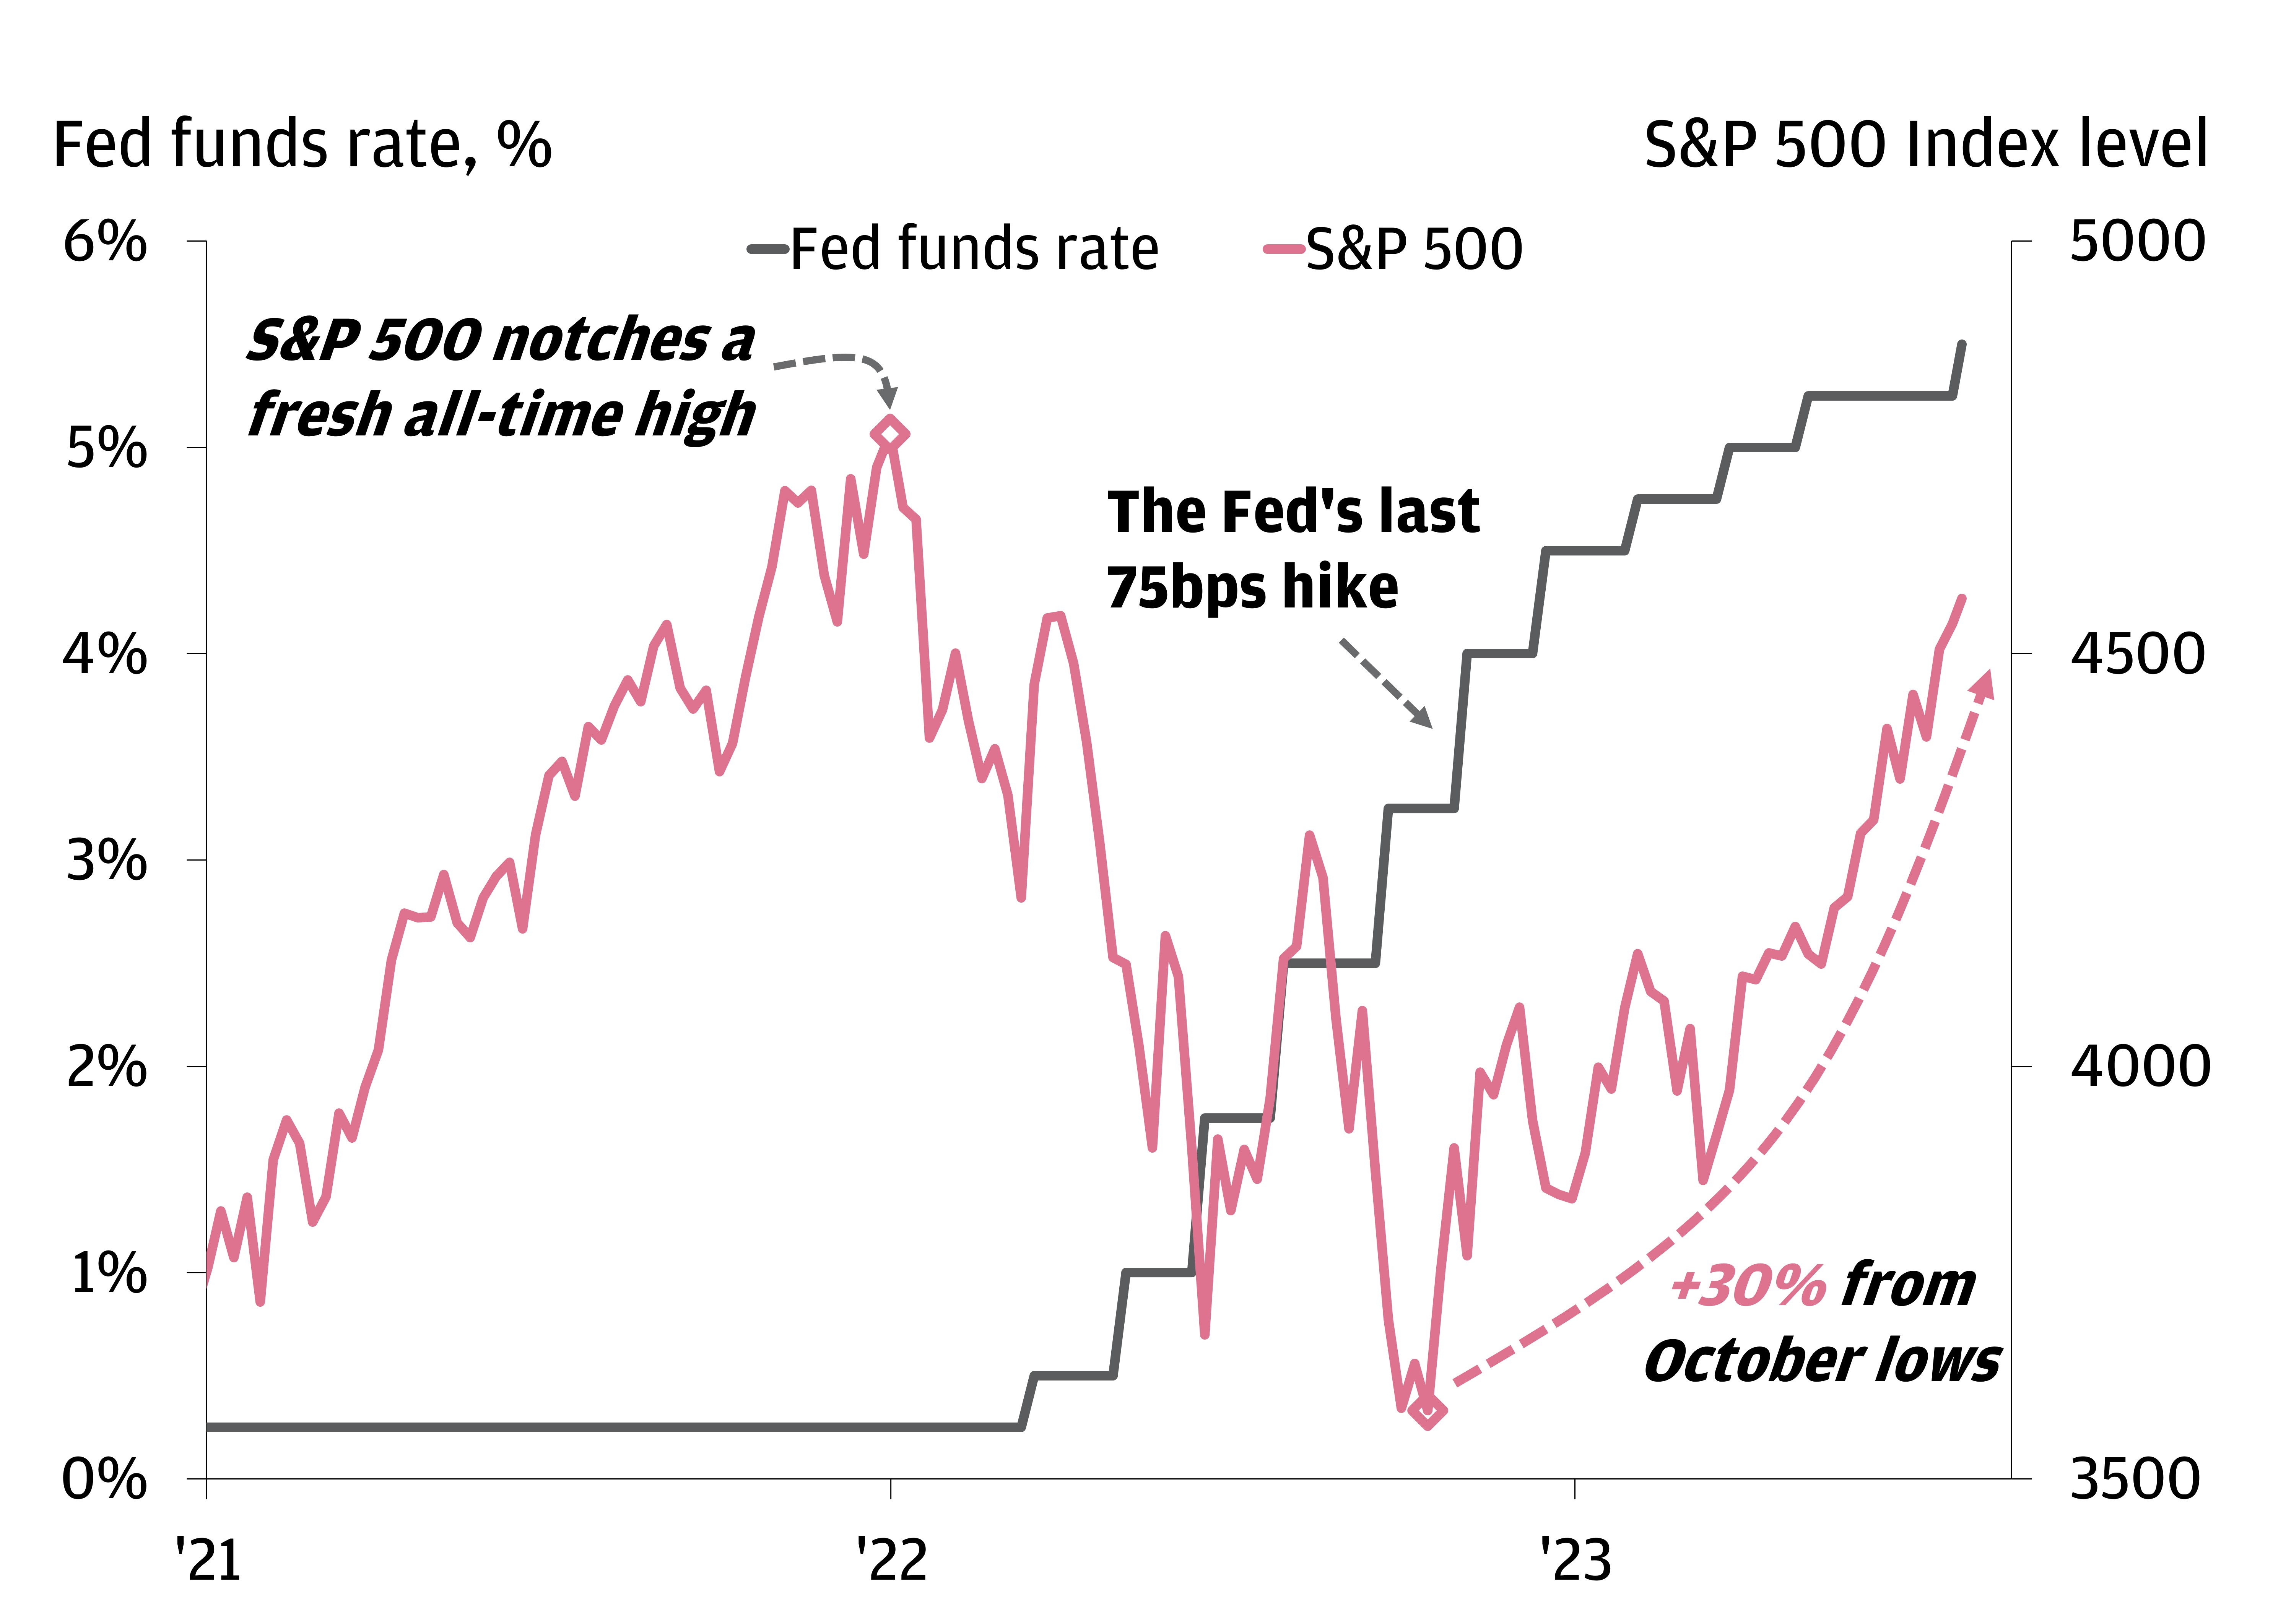 The chart describes the % fed funds rate versus the index level of S&P 500.